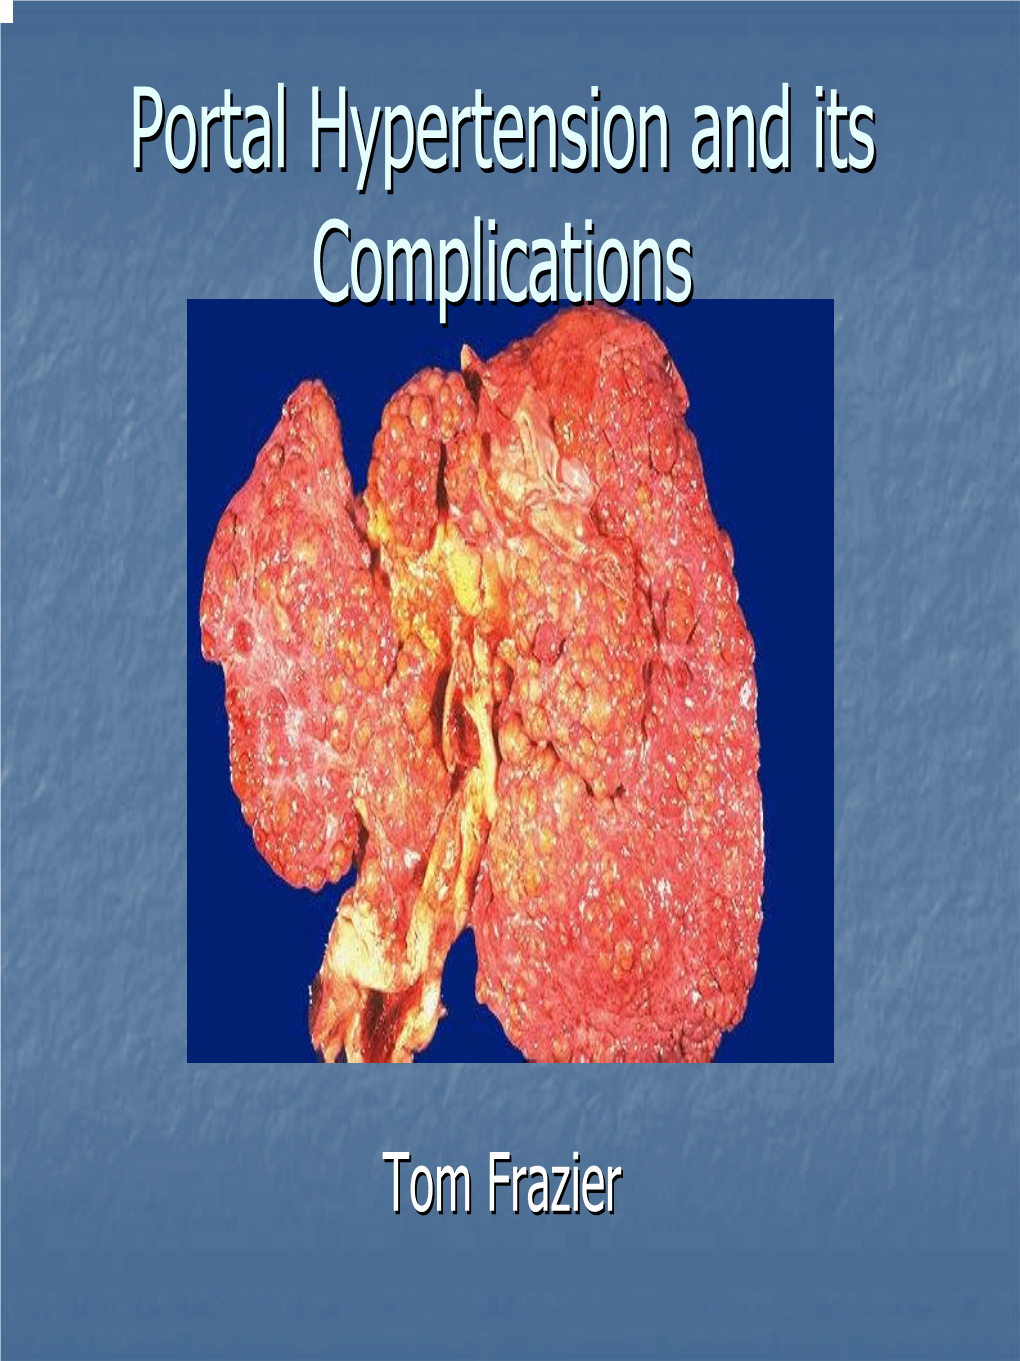 Portal Hypertension and Its Complications